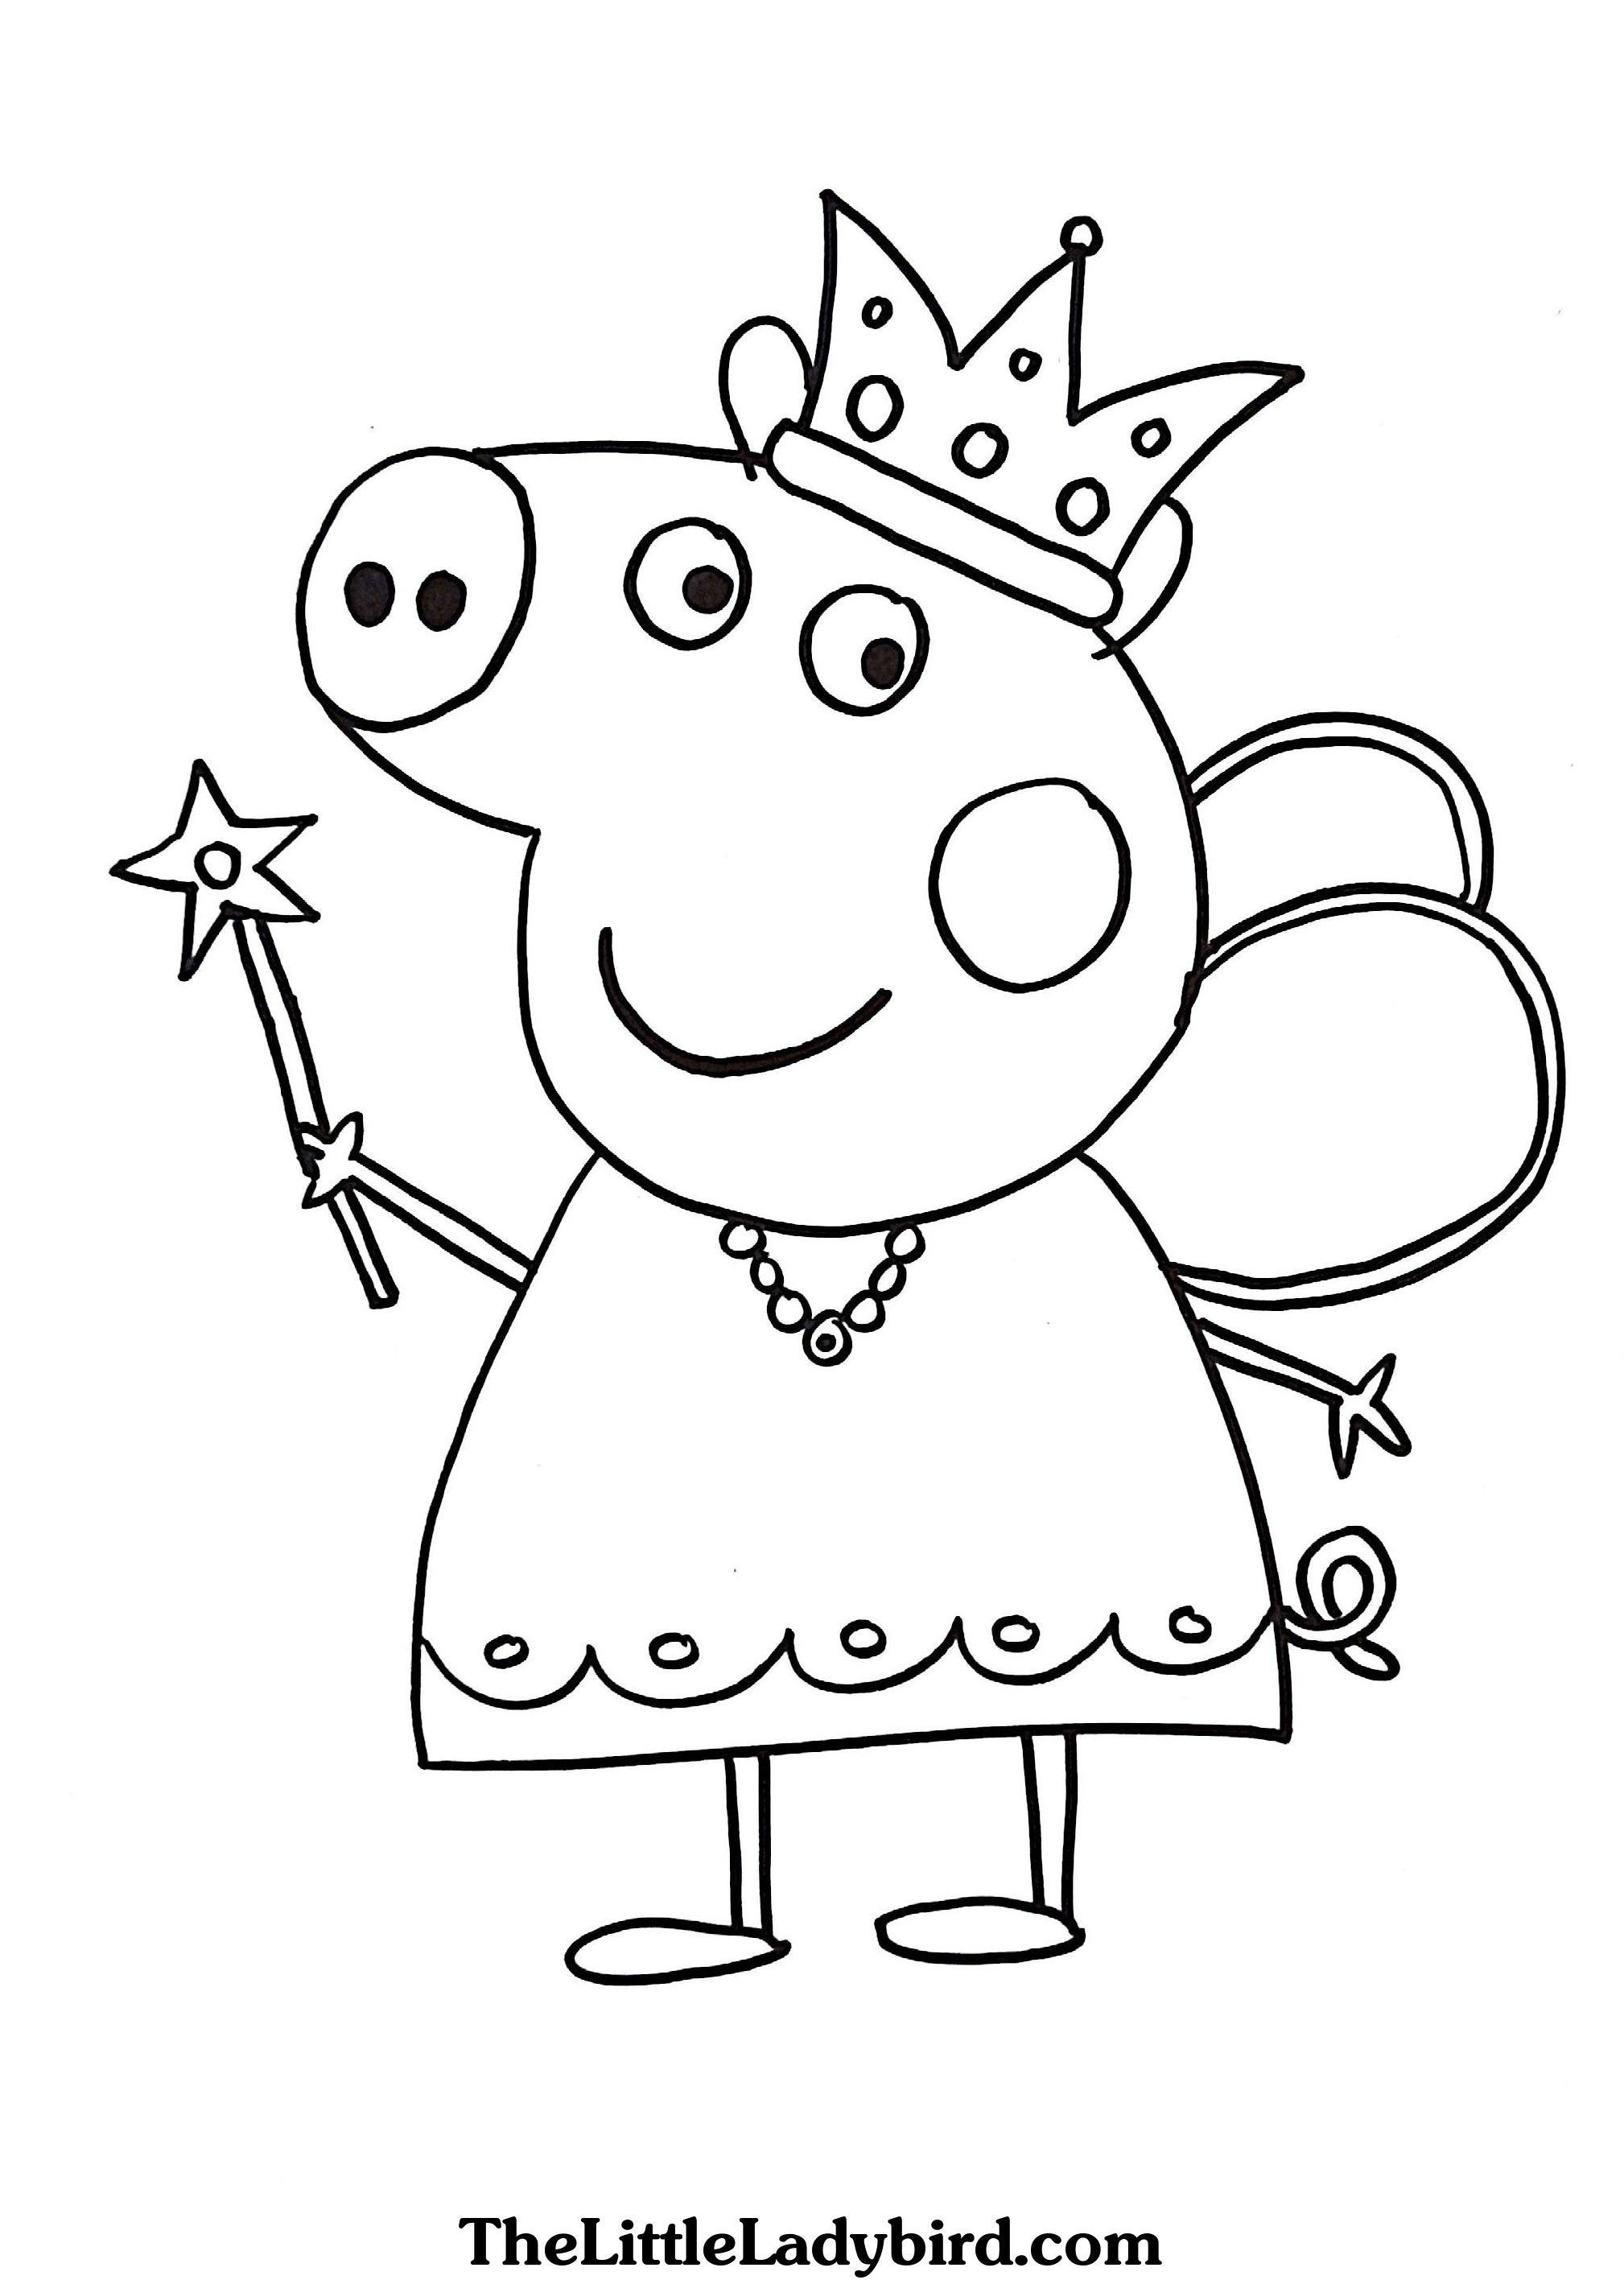 Coloring Pages line Peppa Pig New Free Coloring Pages Printable to Color Kids Drawing Ideas Save